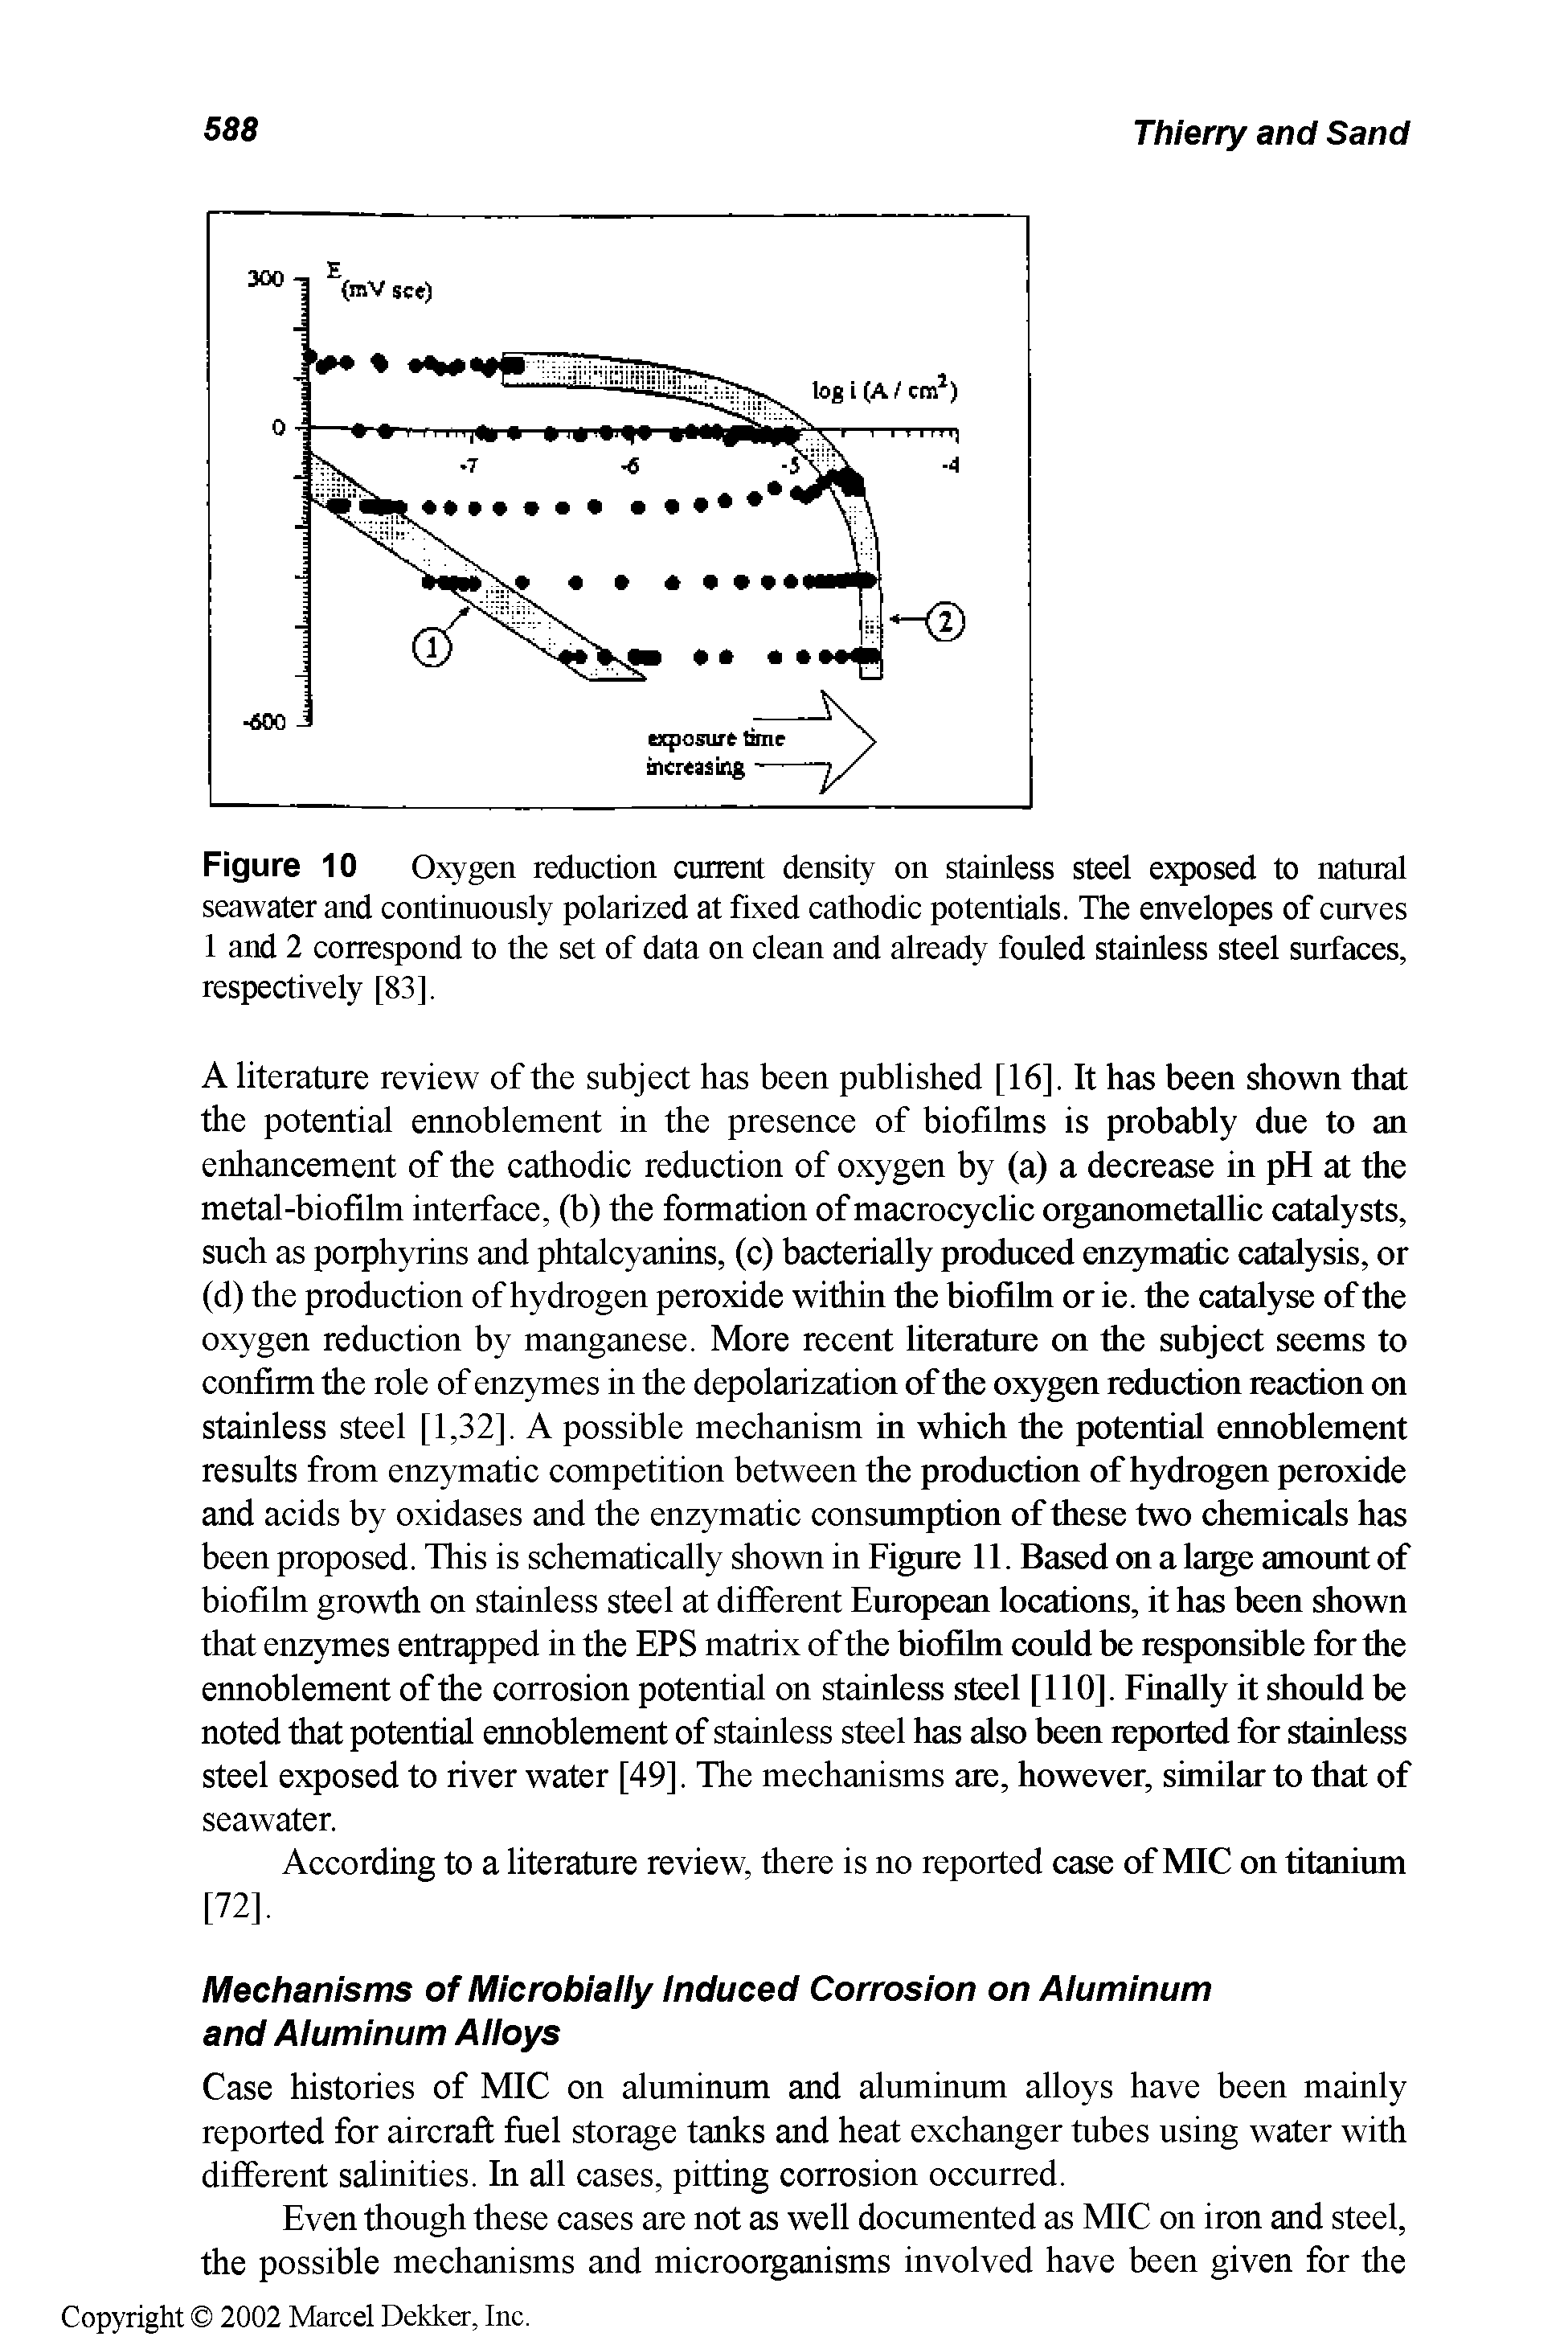 Figure 10 Oxygen reduction current density on stainless steel erqxrsed to natural seawater and continuously polarized at fixed cathodic potentials. The envelopes of cmves 1 and 2 correspond to the set of data on clean and already fottled stainless steel sttrfaces, respectively [83],...